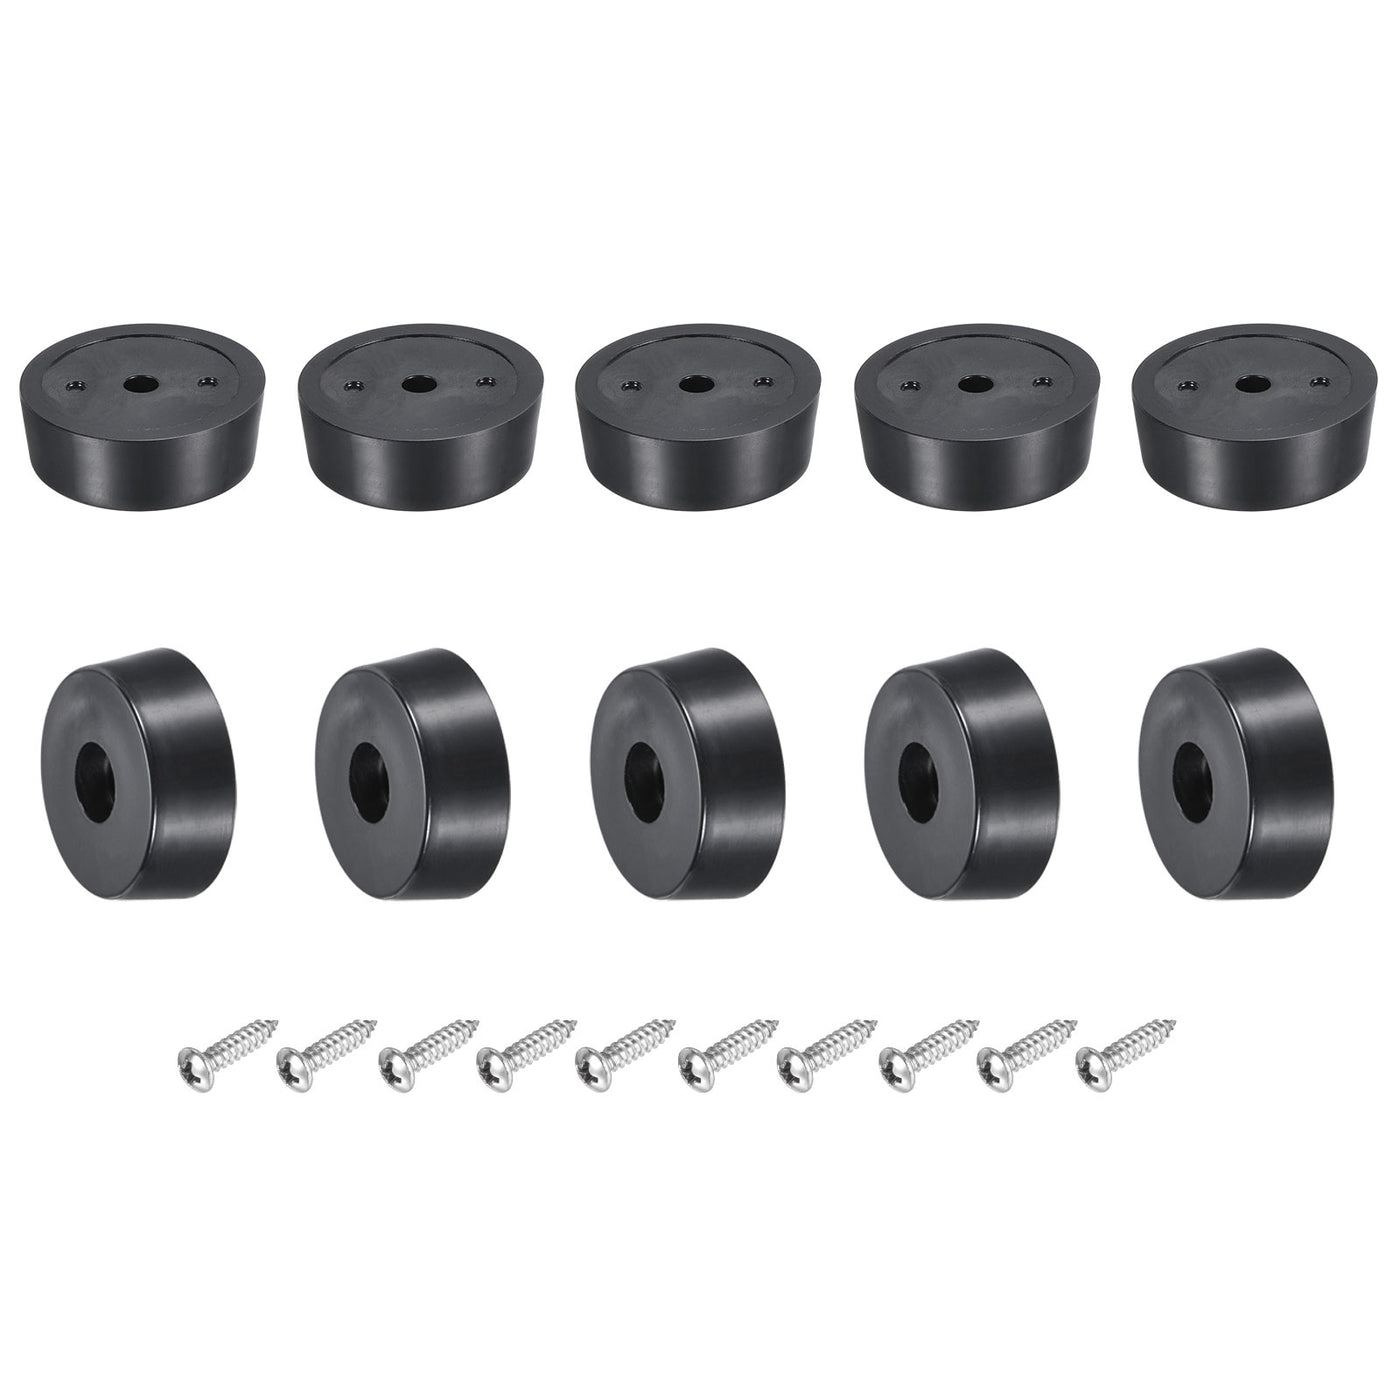 uxcell Uxcell Rubber Bumper Feet, 0.35" H x 0.98" W Round Pads with Stainless Steel Washer and Screws for Furniture, Appliances, Electronics 16 Pcs